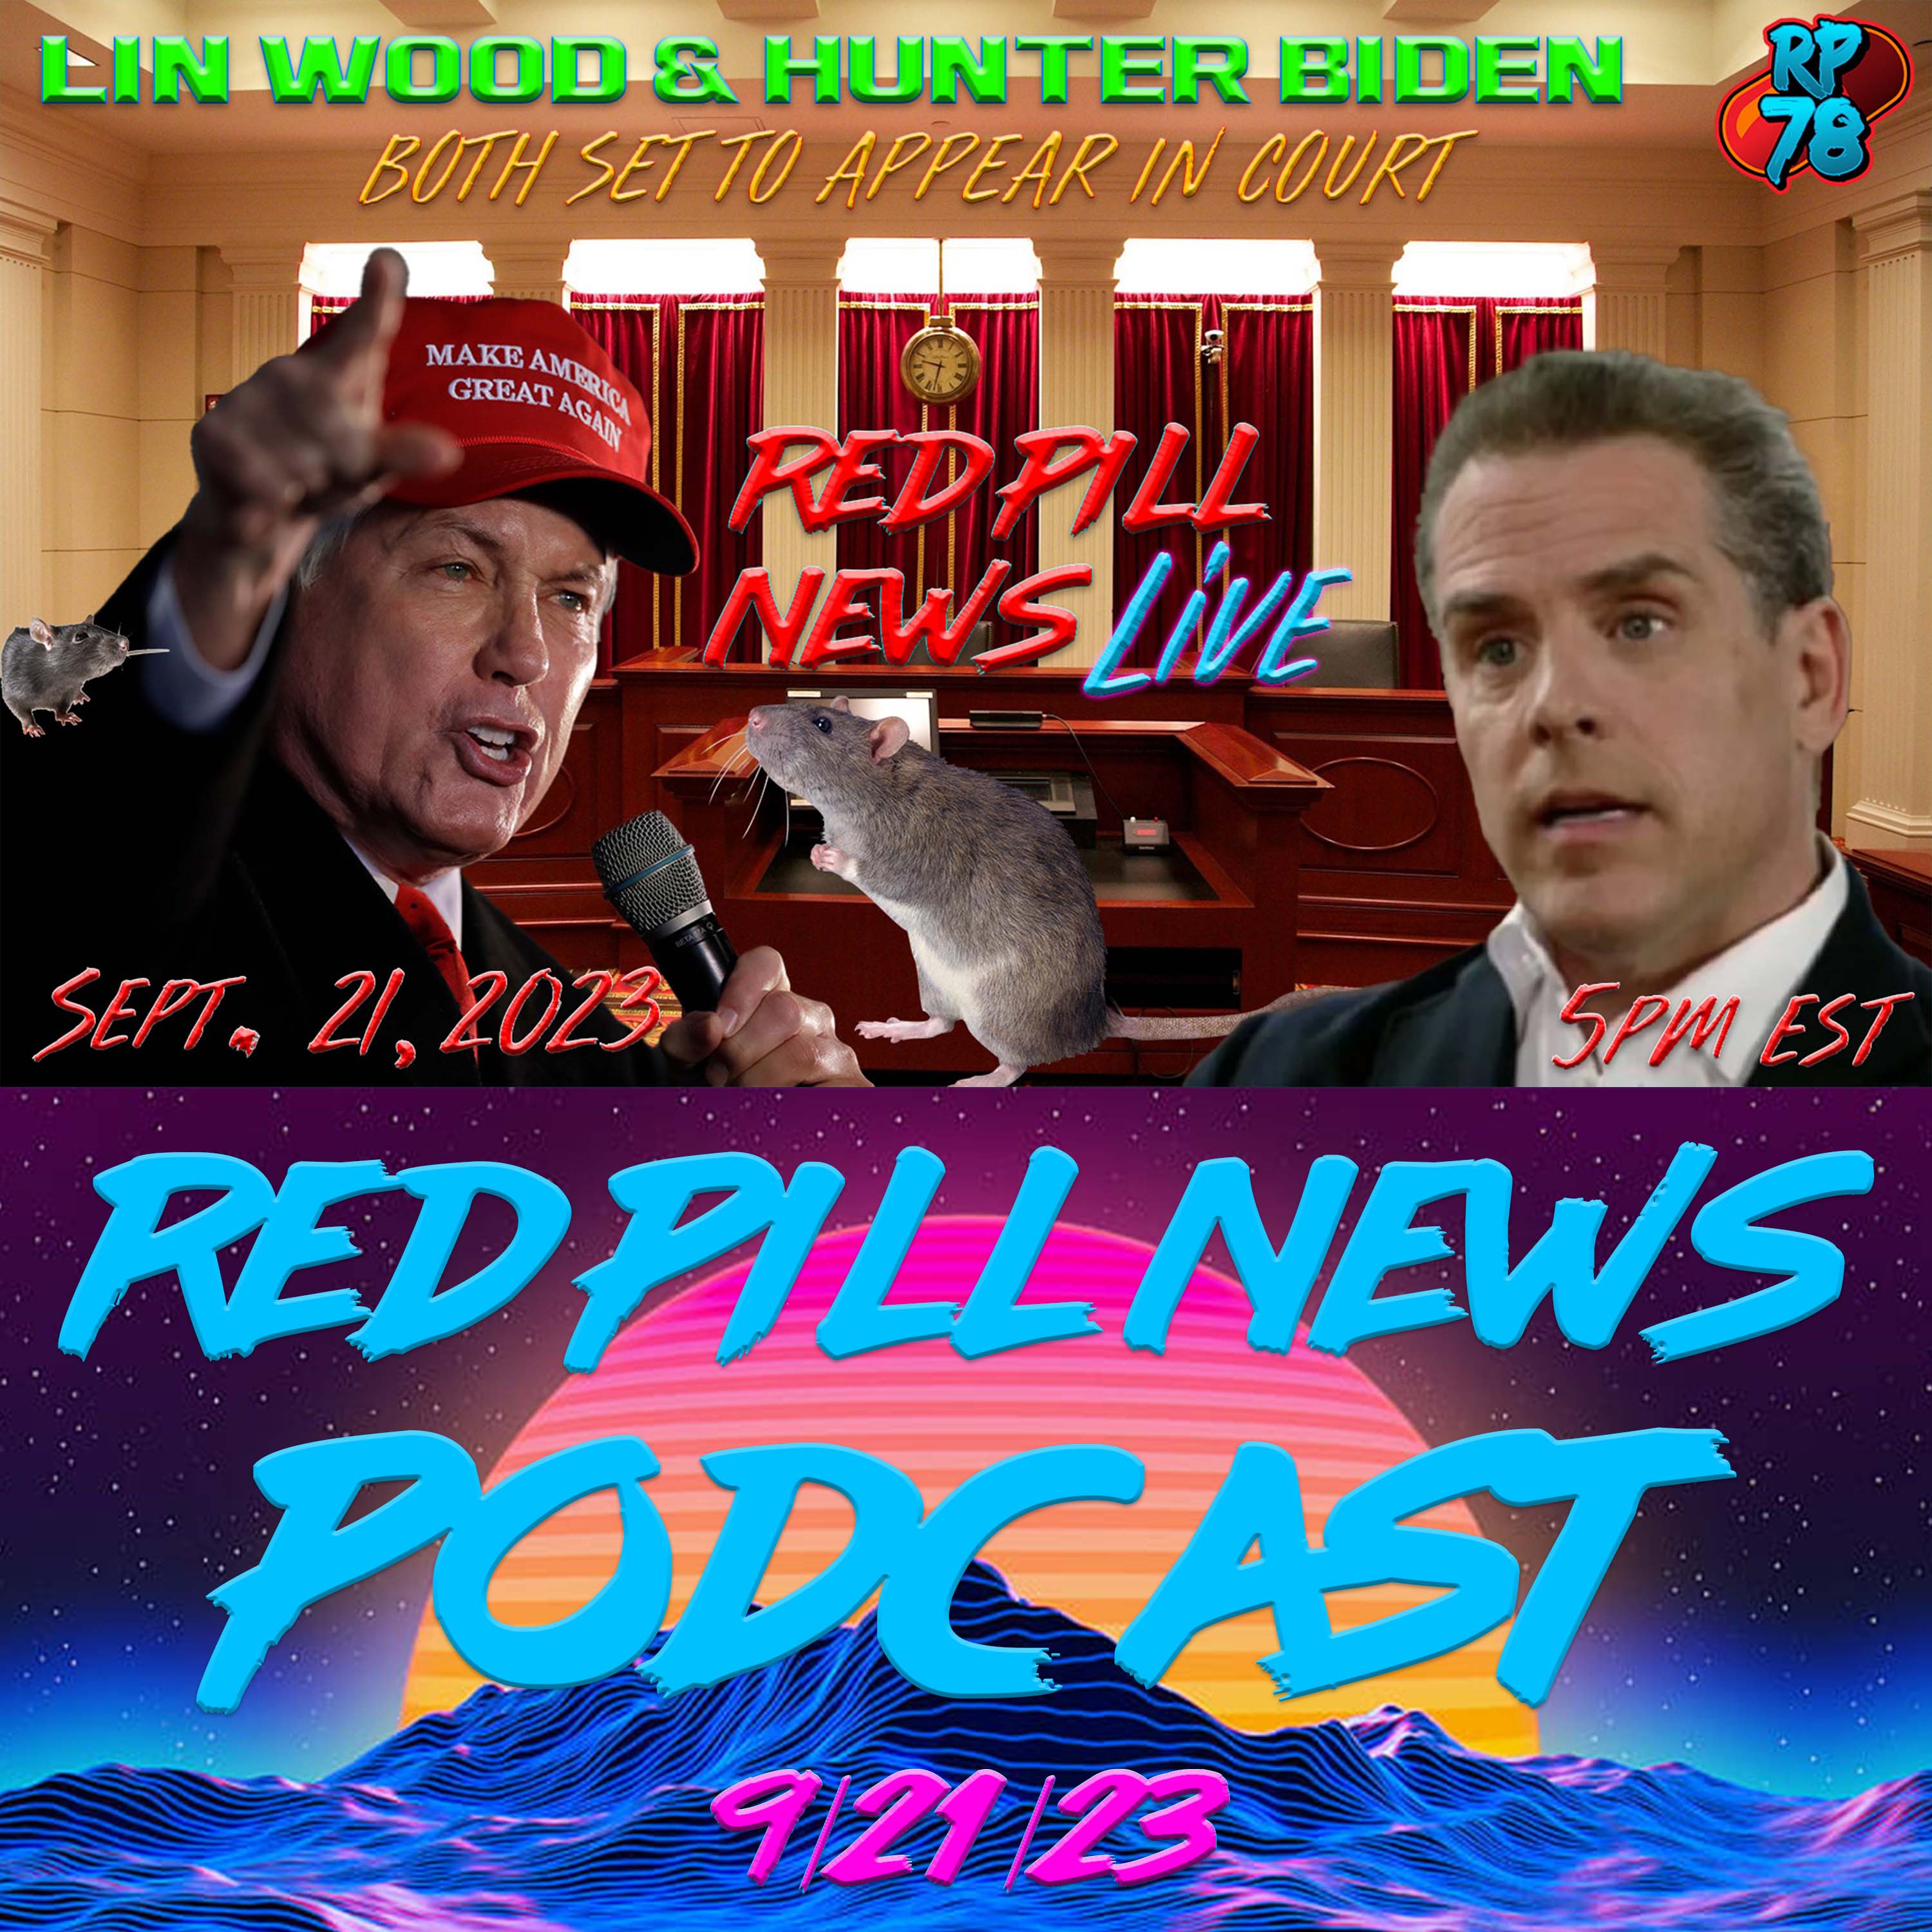 Bosom Buddies - Lin & Hunter Prep for Court Appearances on Red Pill News Live